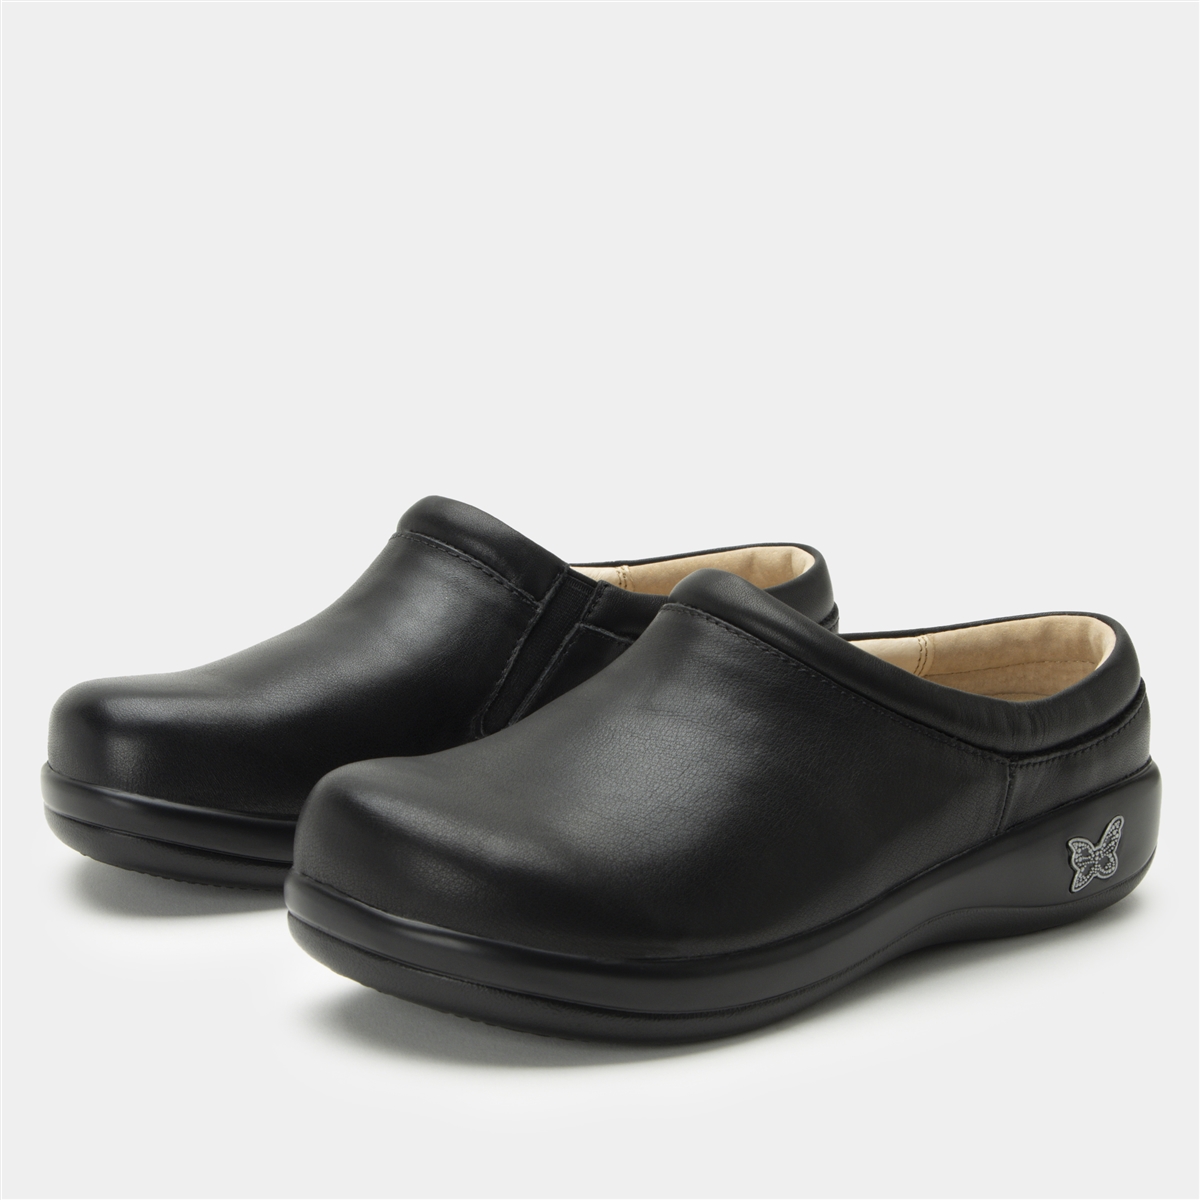 Nursing Shoes For Your Style! Alegria Kayla Classic Black